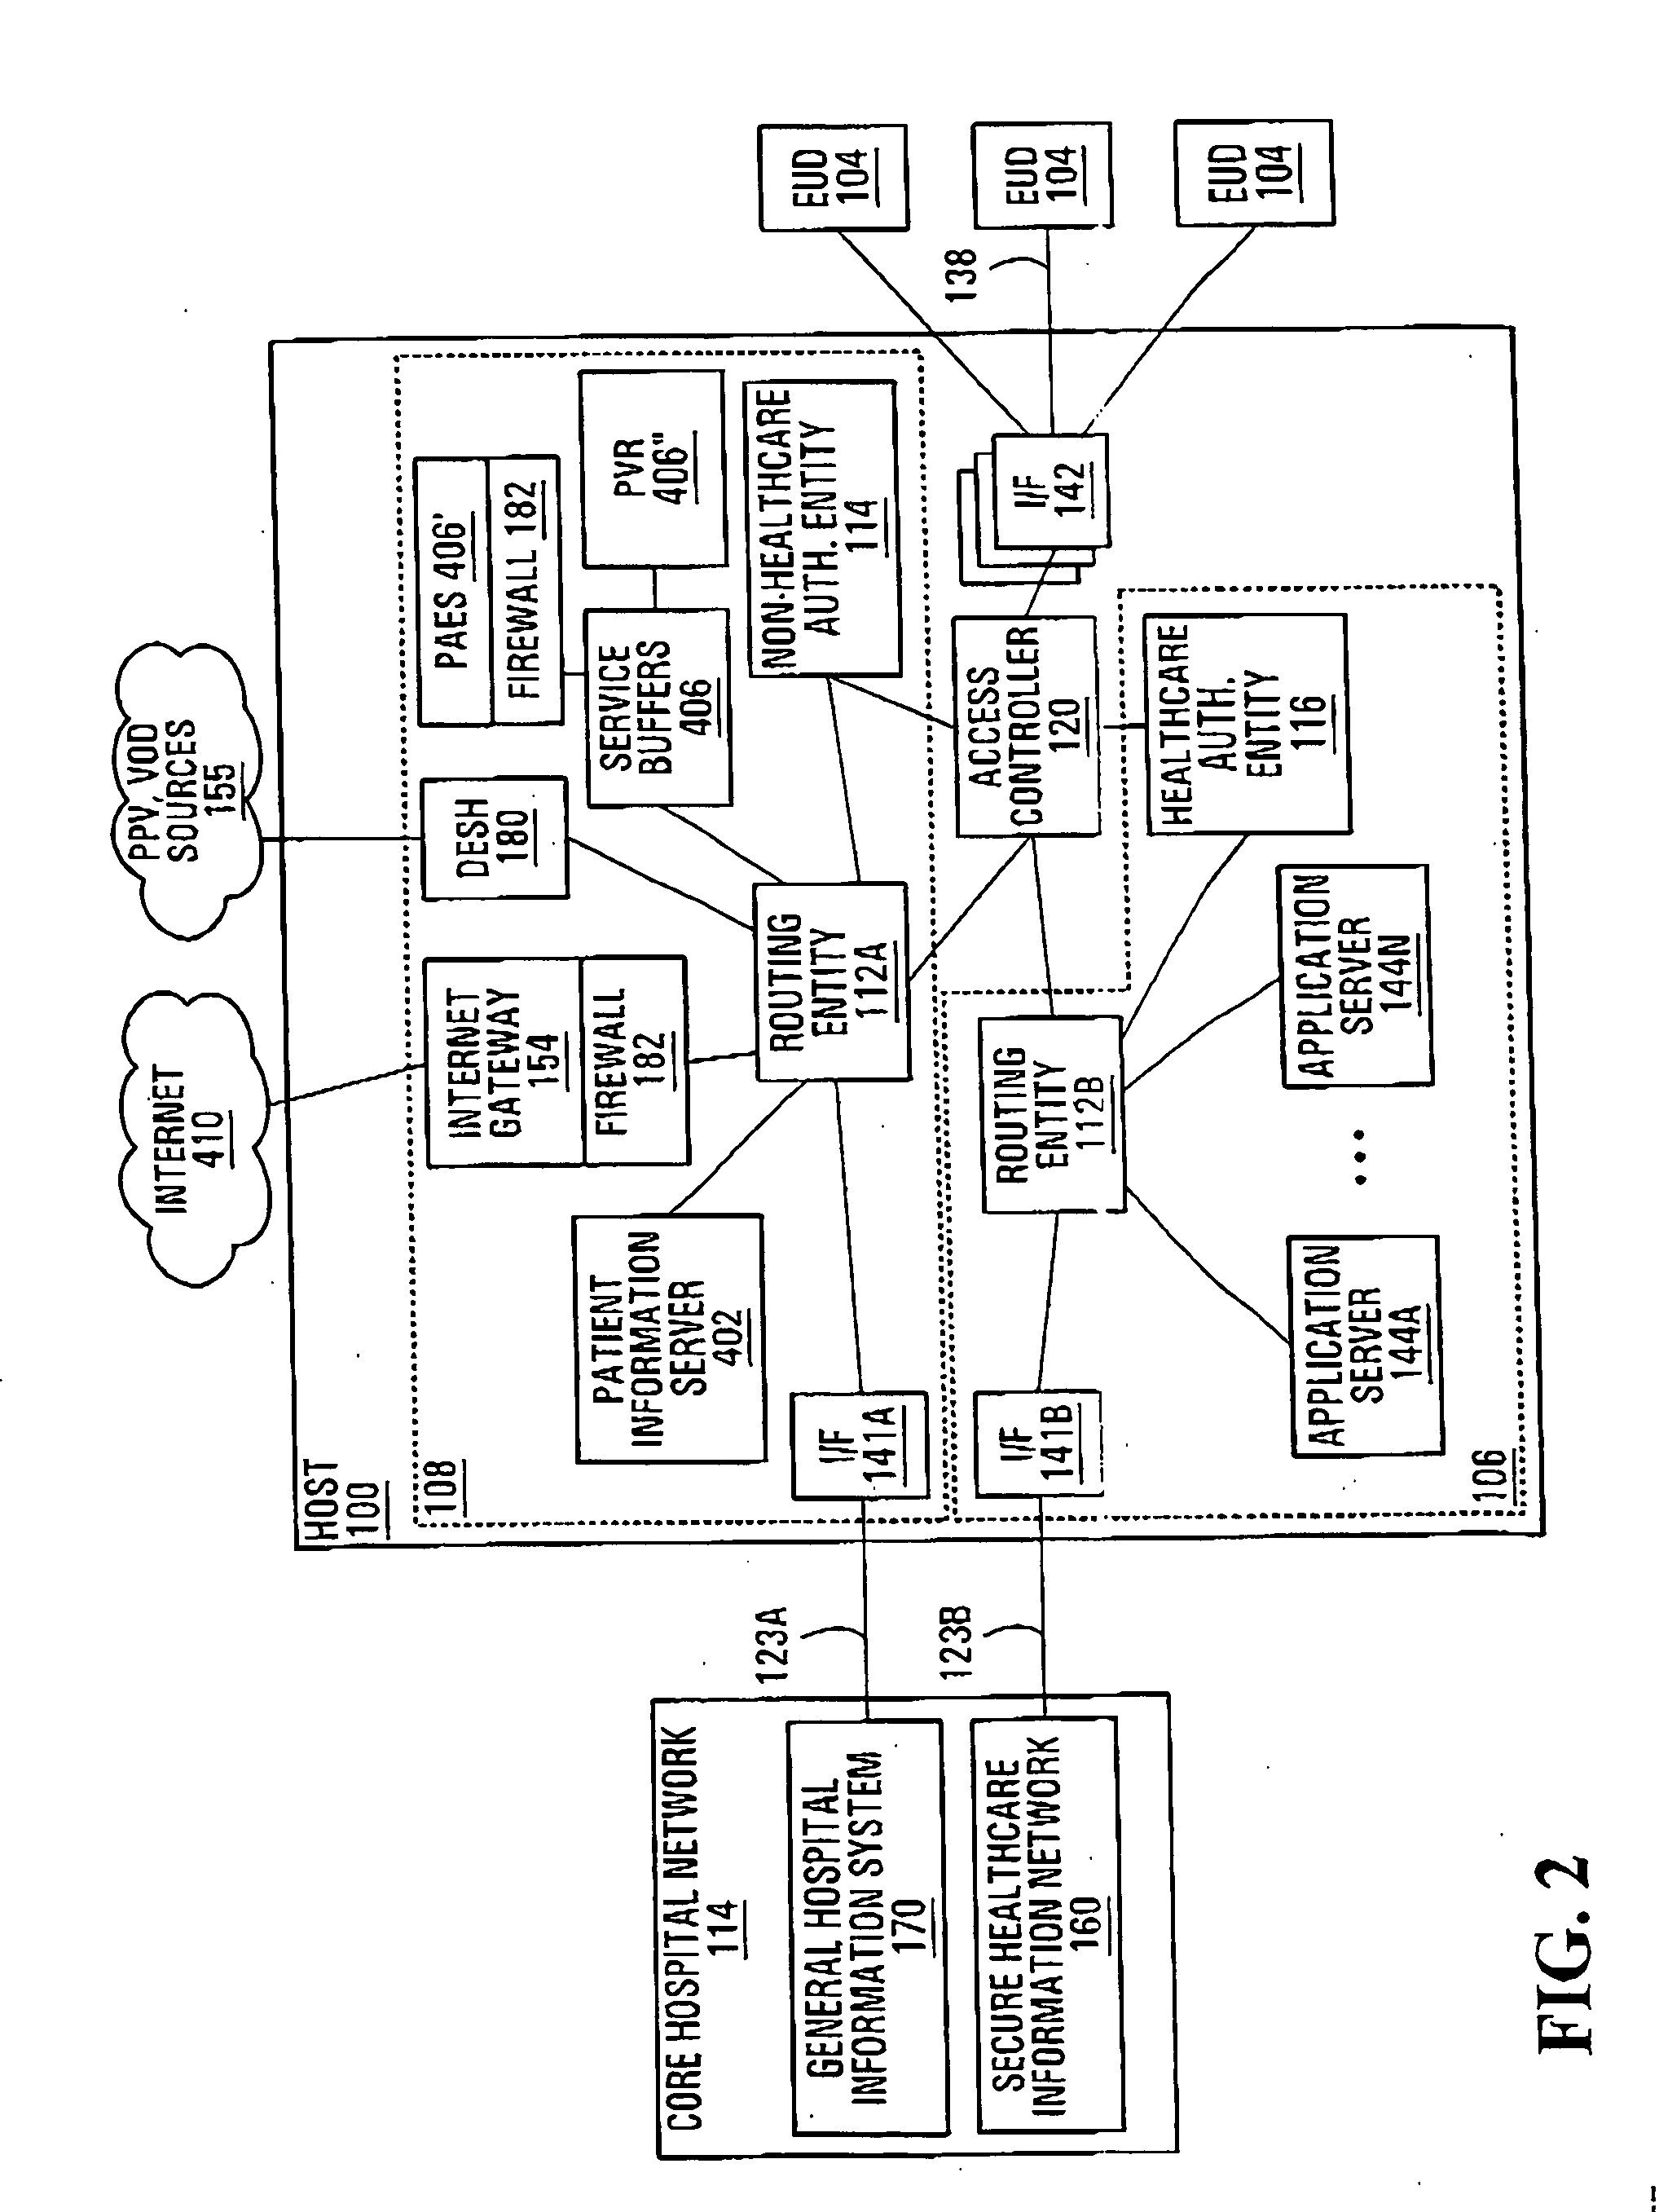 Systems and methods for preventing an attack on healthcare data processing resources in a hospital information system